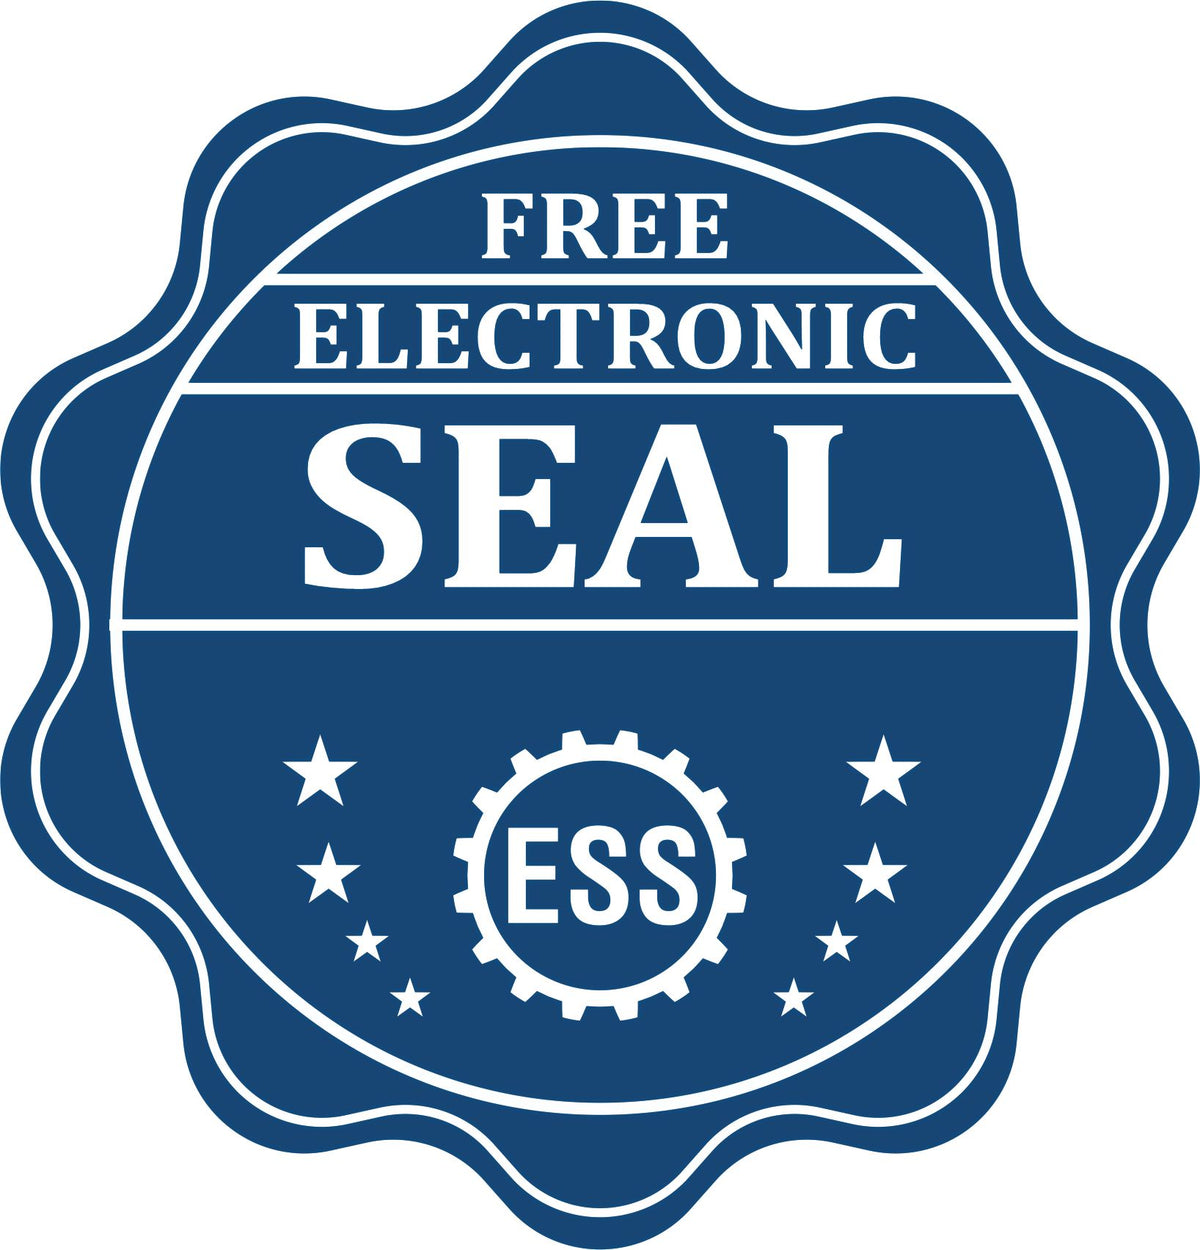 A badge showing a free electronic seal for the State of Texas Soft Land Surveyor Embossing Seal with stars and the ESS gear on the emblem.